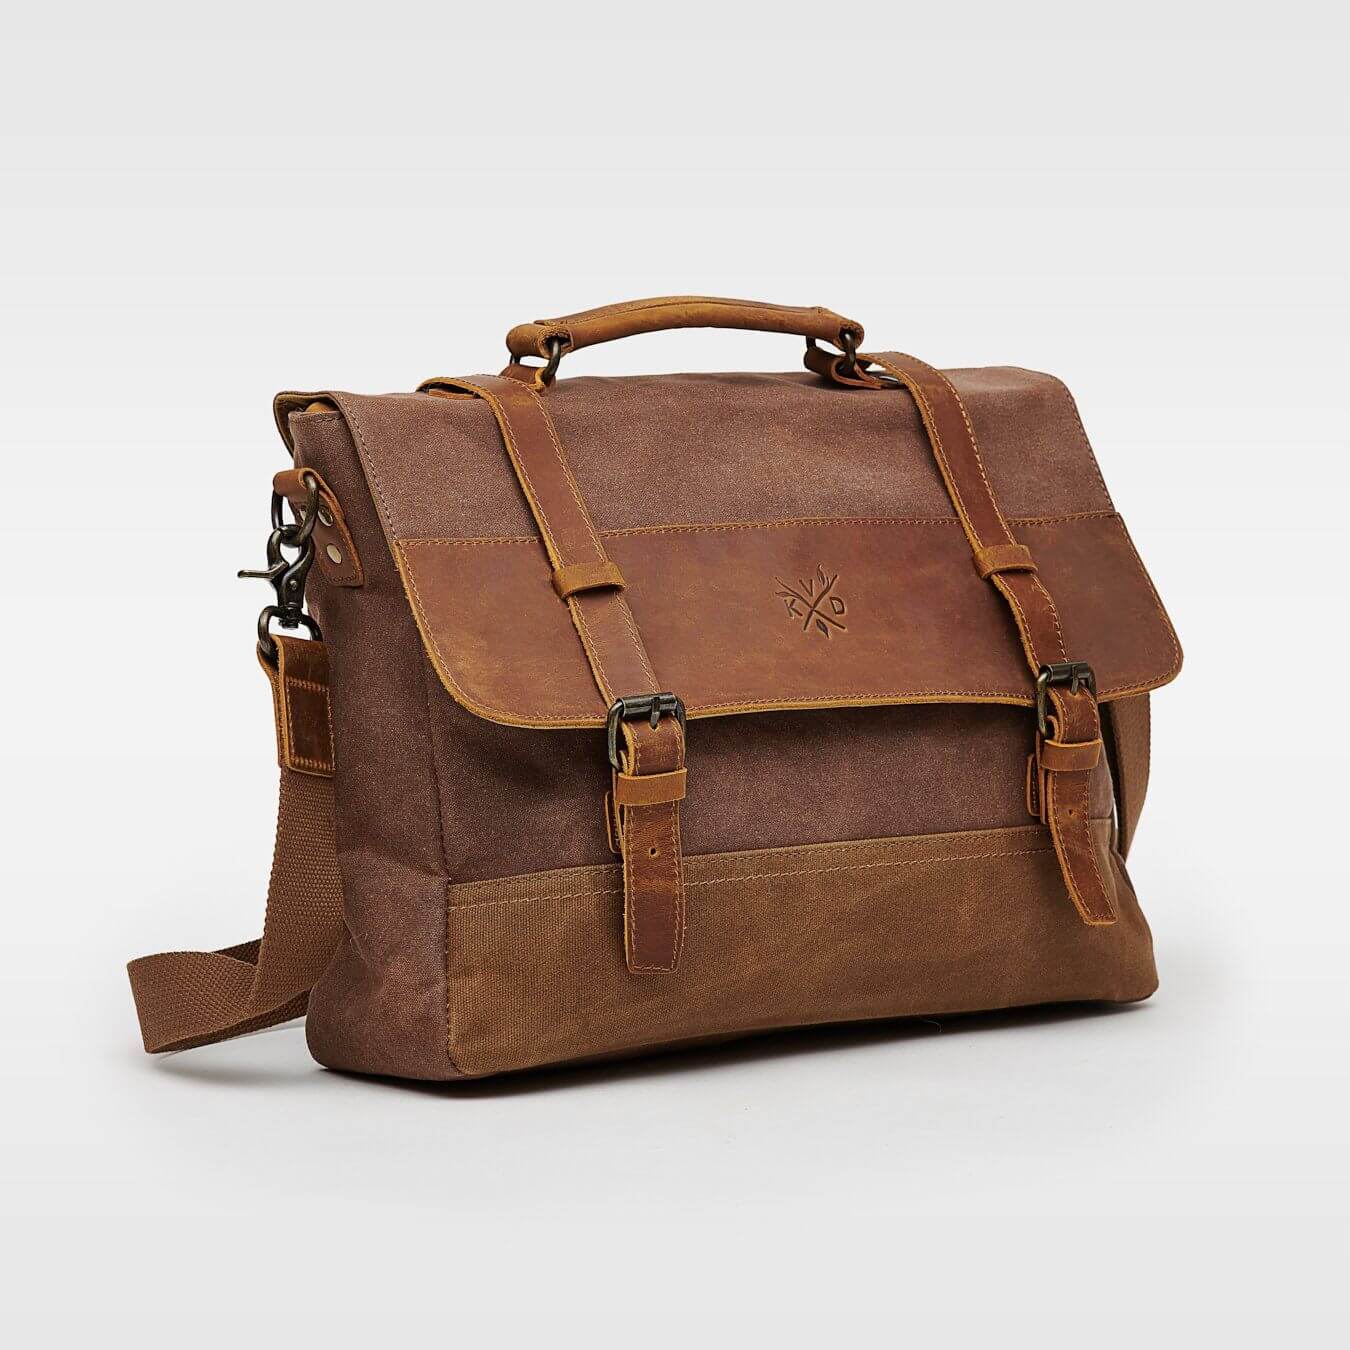 Backpack or Messenger Bag? It was a no brainer…